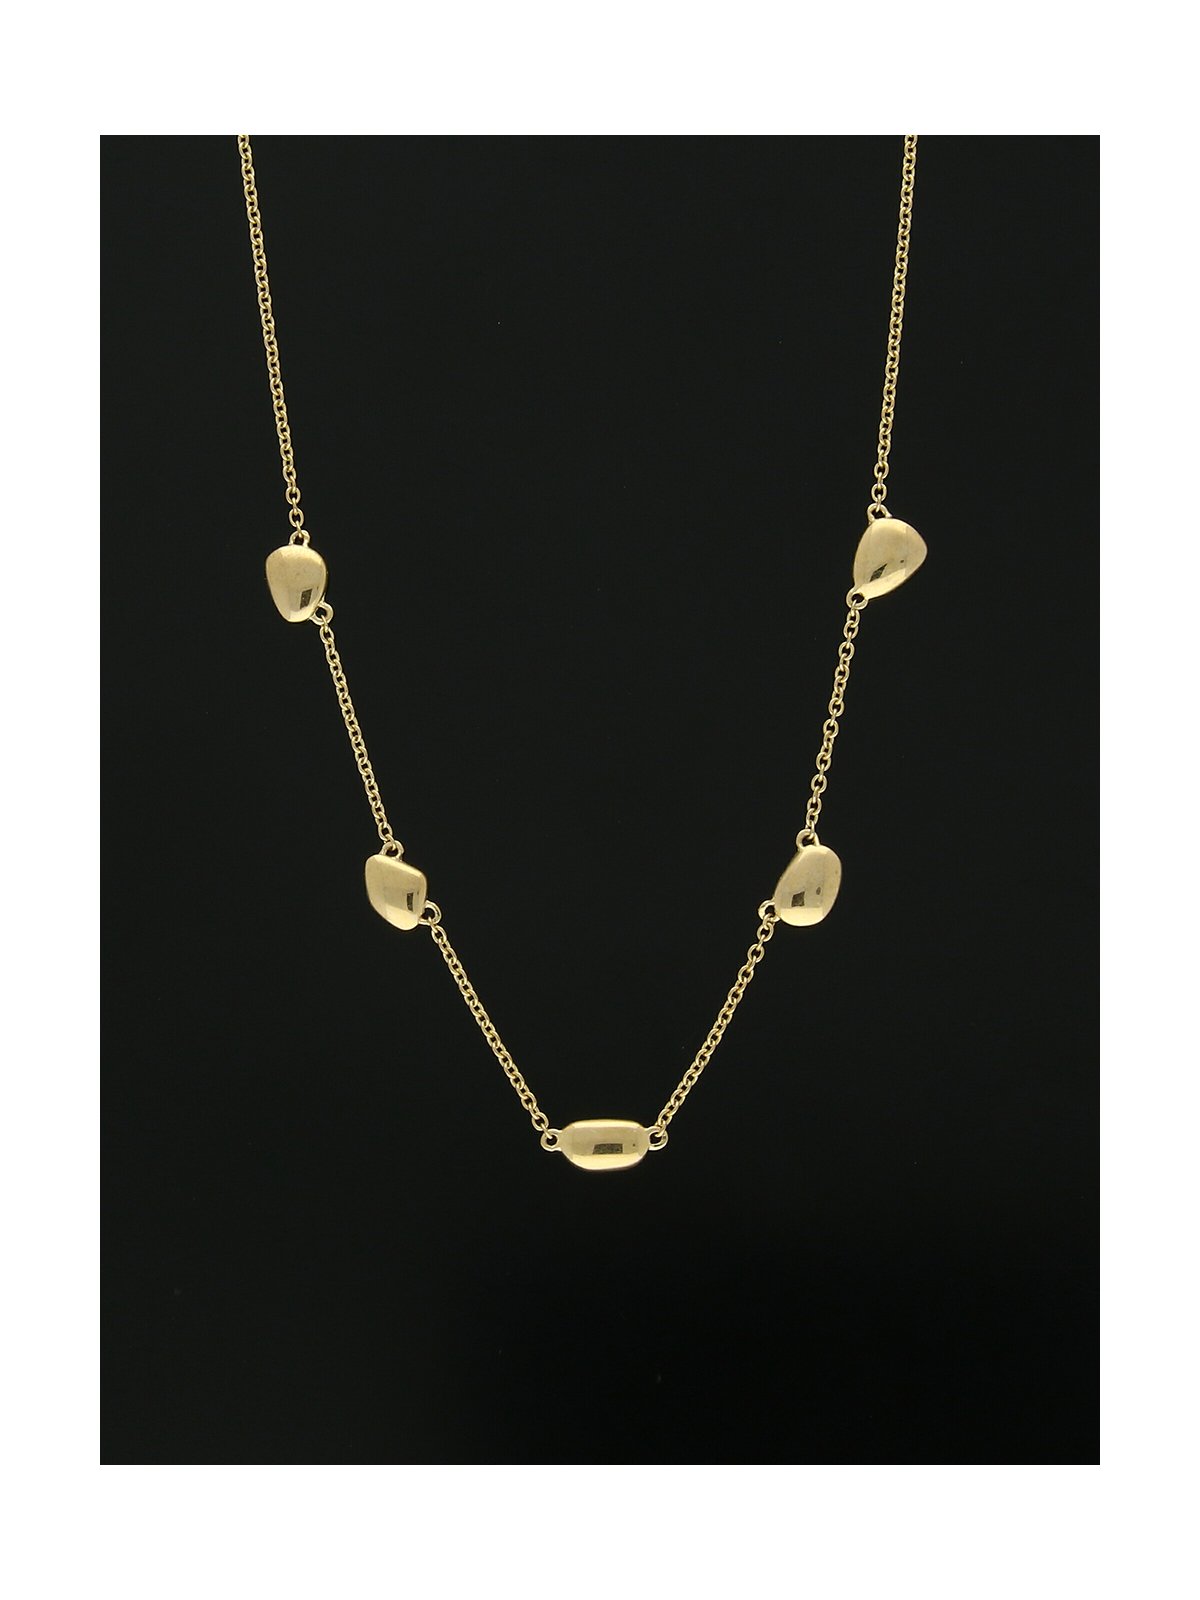 Irregular Oval Shape Necklace in 9ct Yellow Gold